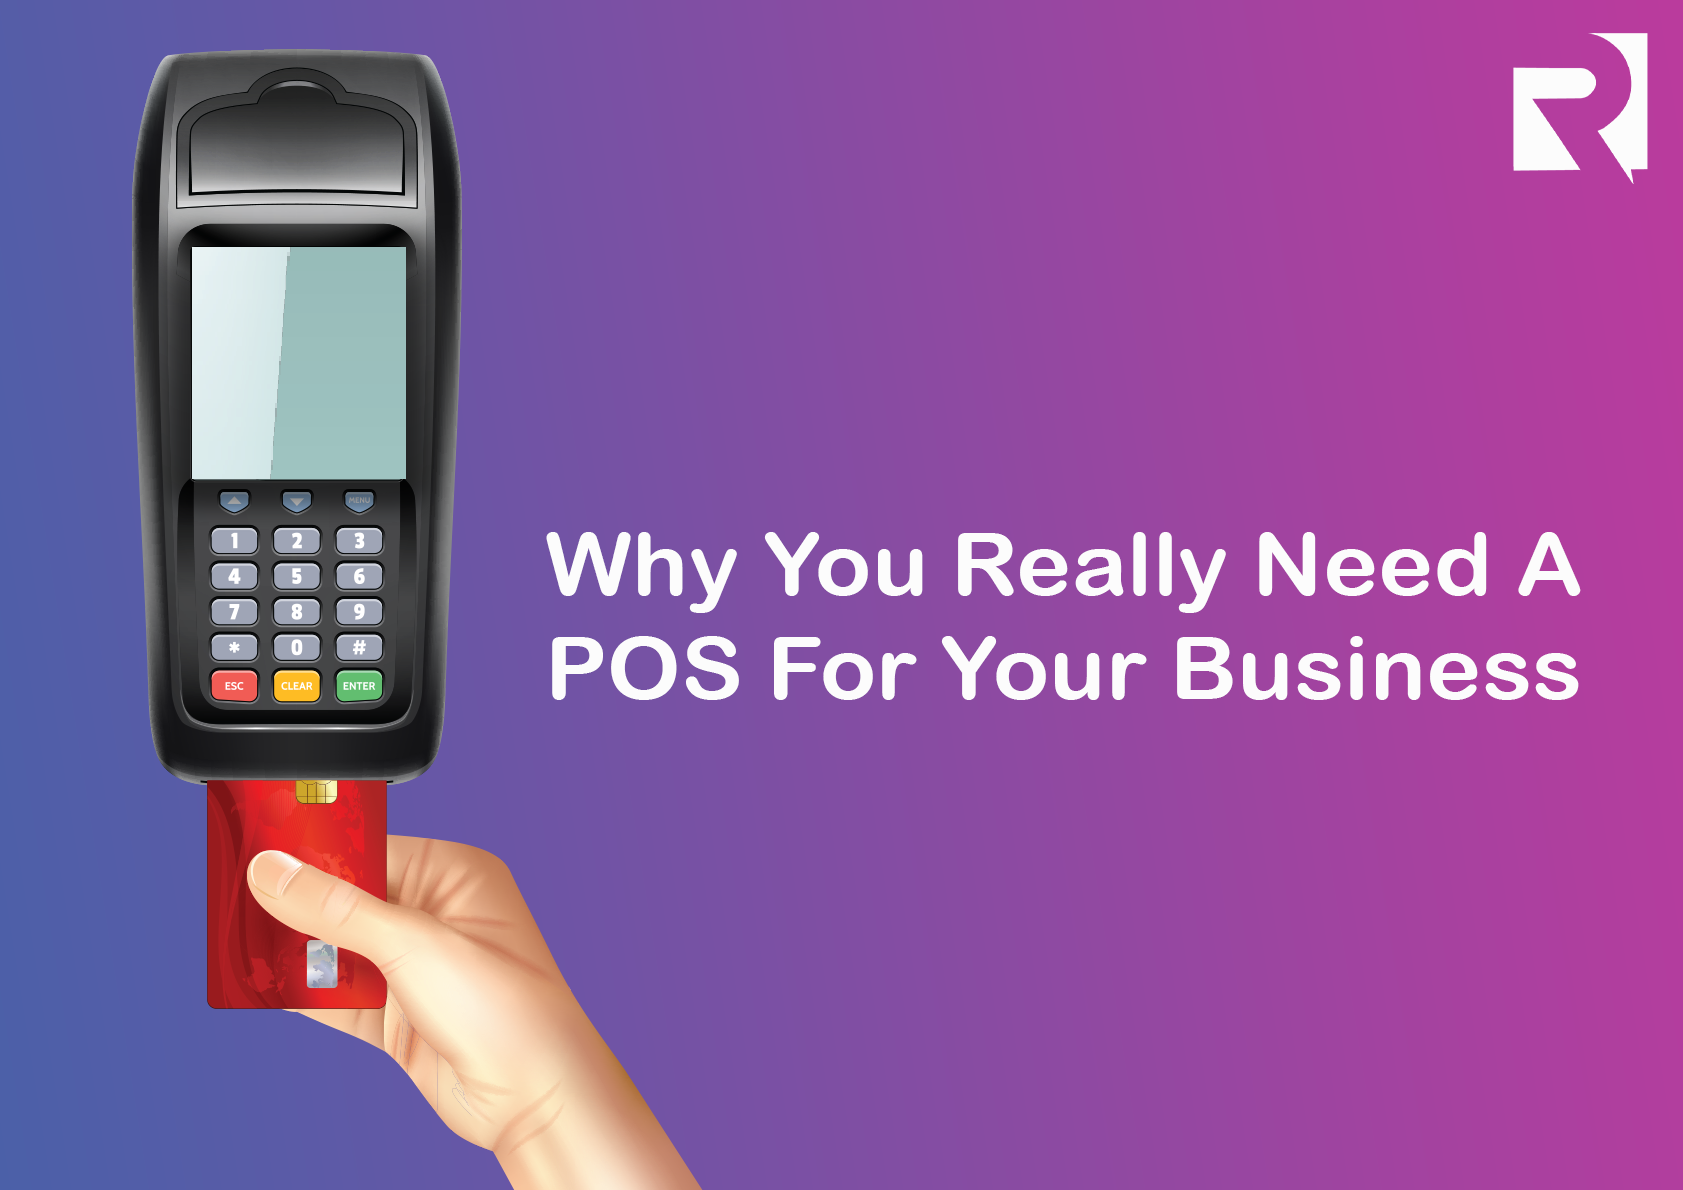 Why You Really Need A POS For Your Business